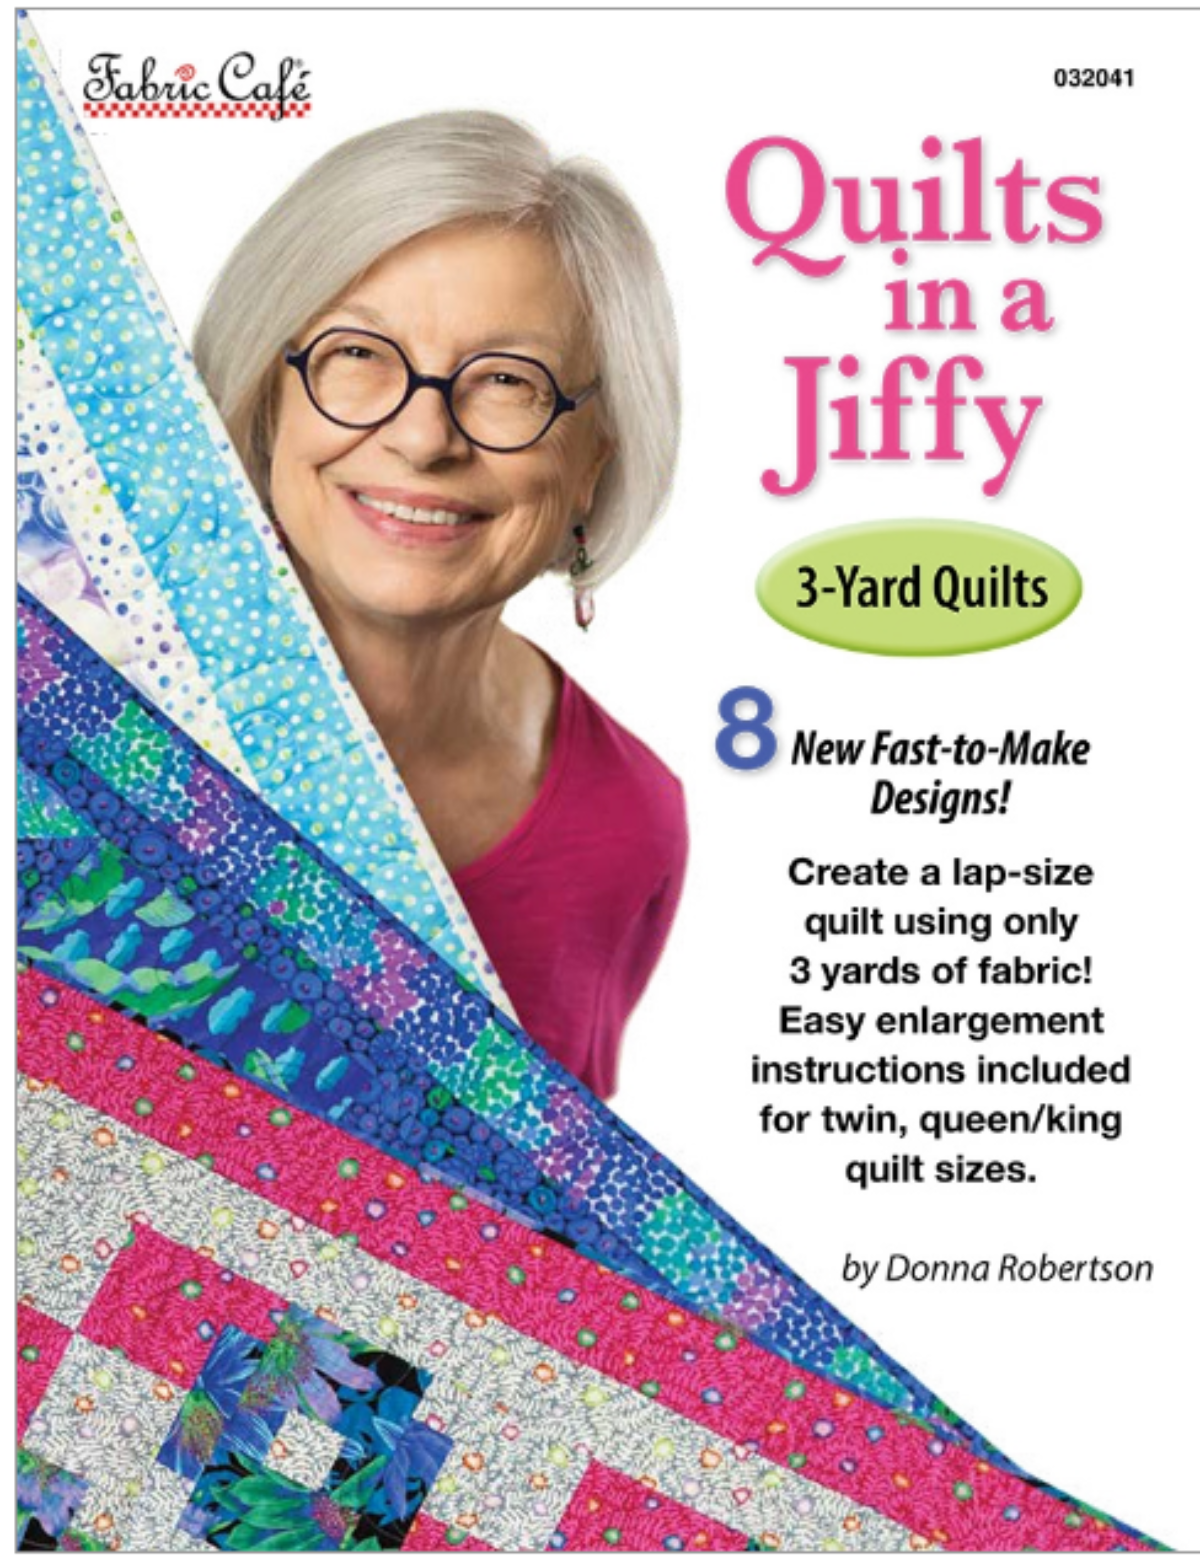 Quilt Favorites 3-Yard Quilts Pattern Book